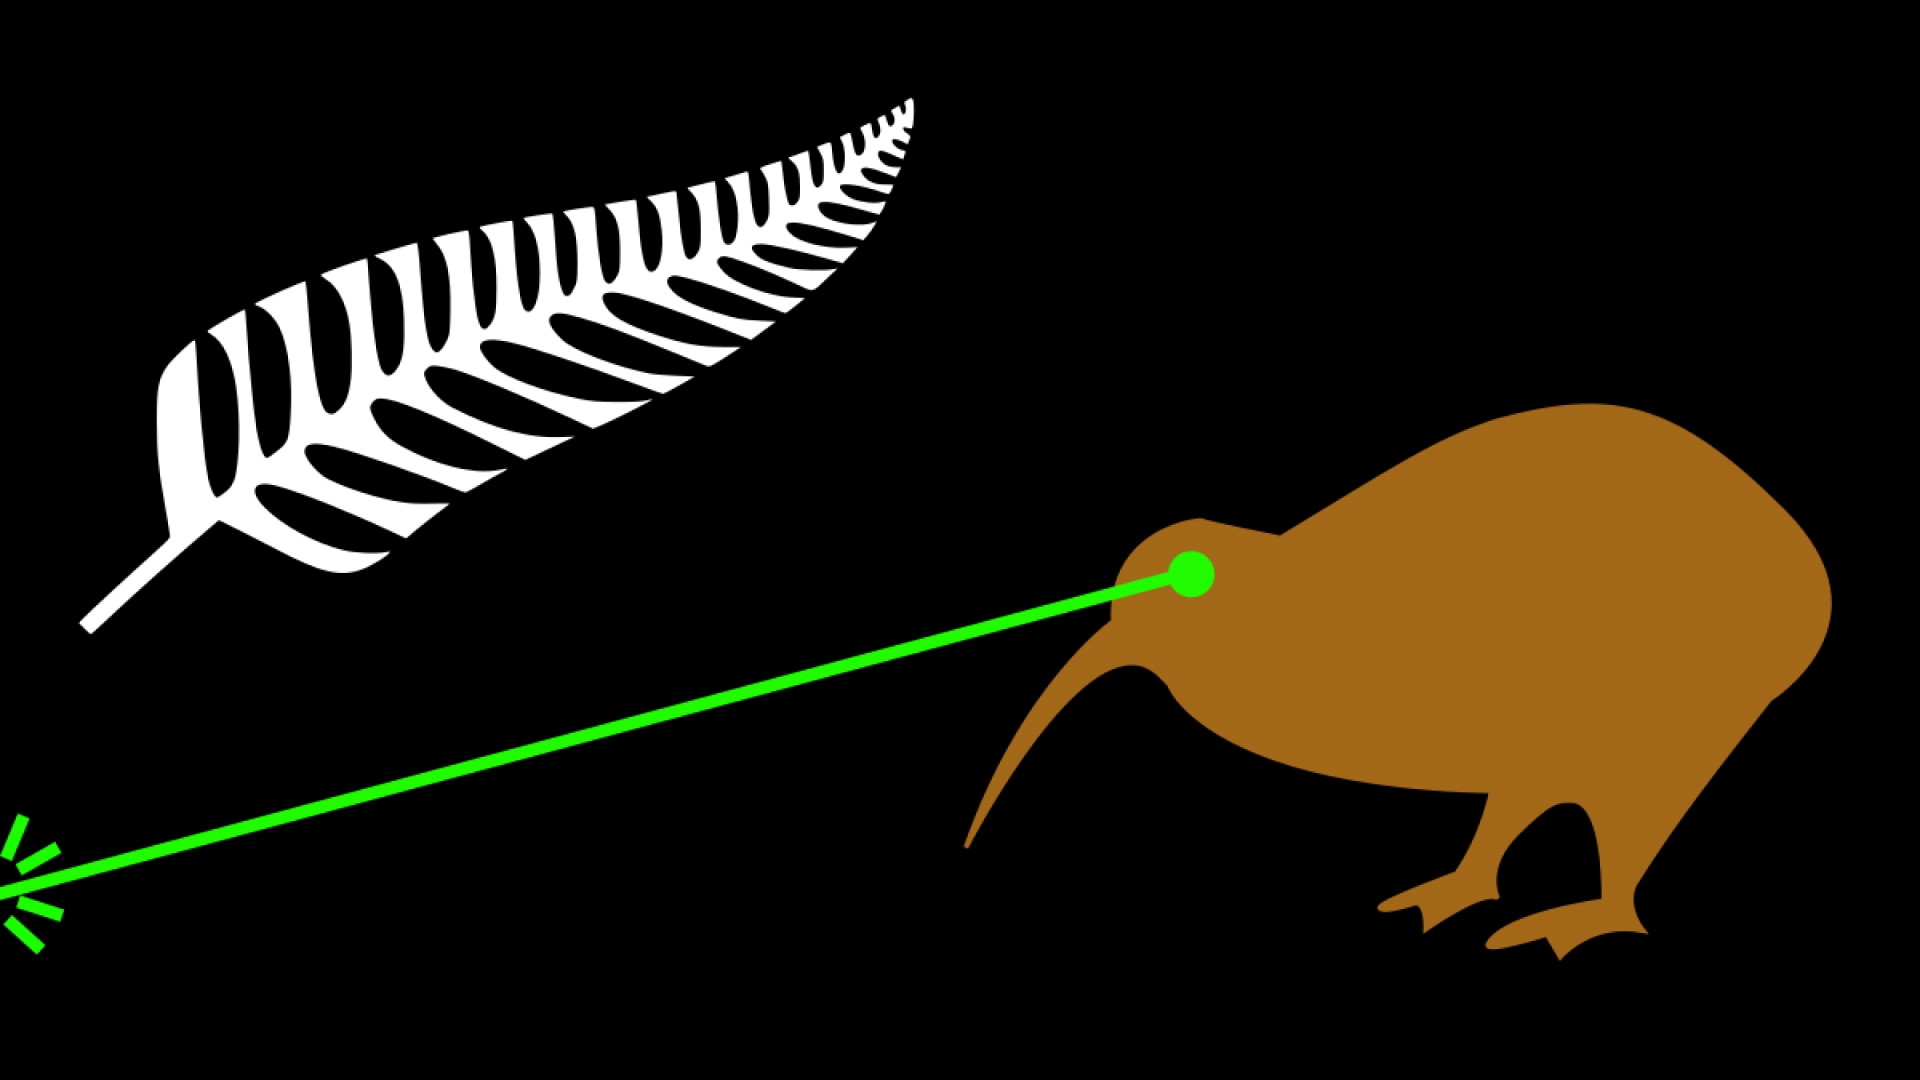 Laser Kiwi flag – black background with a silver fern in the top-left, and a brown kiwi on the right, firing laser beams from its eyes.